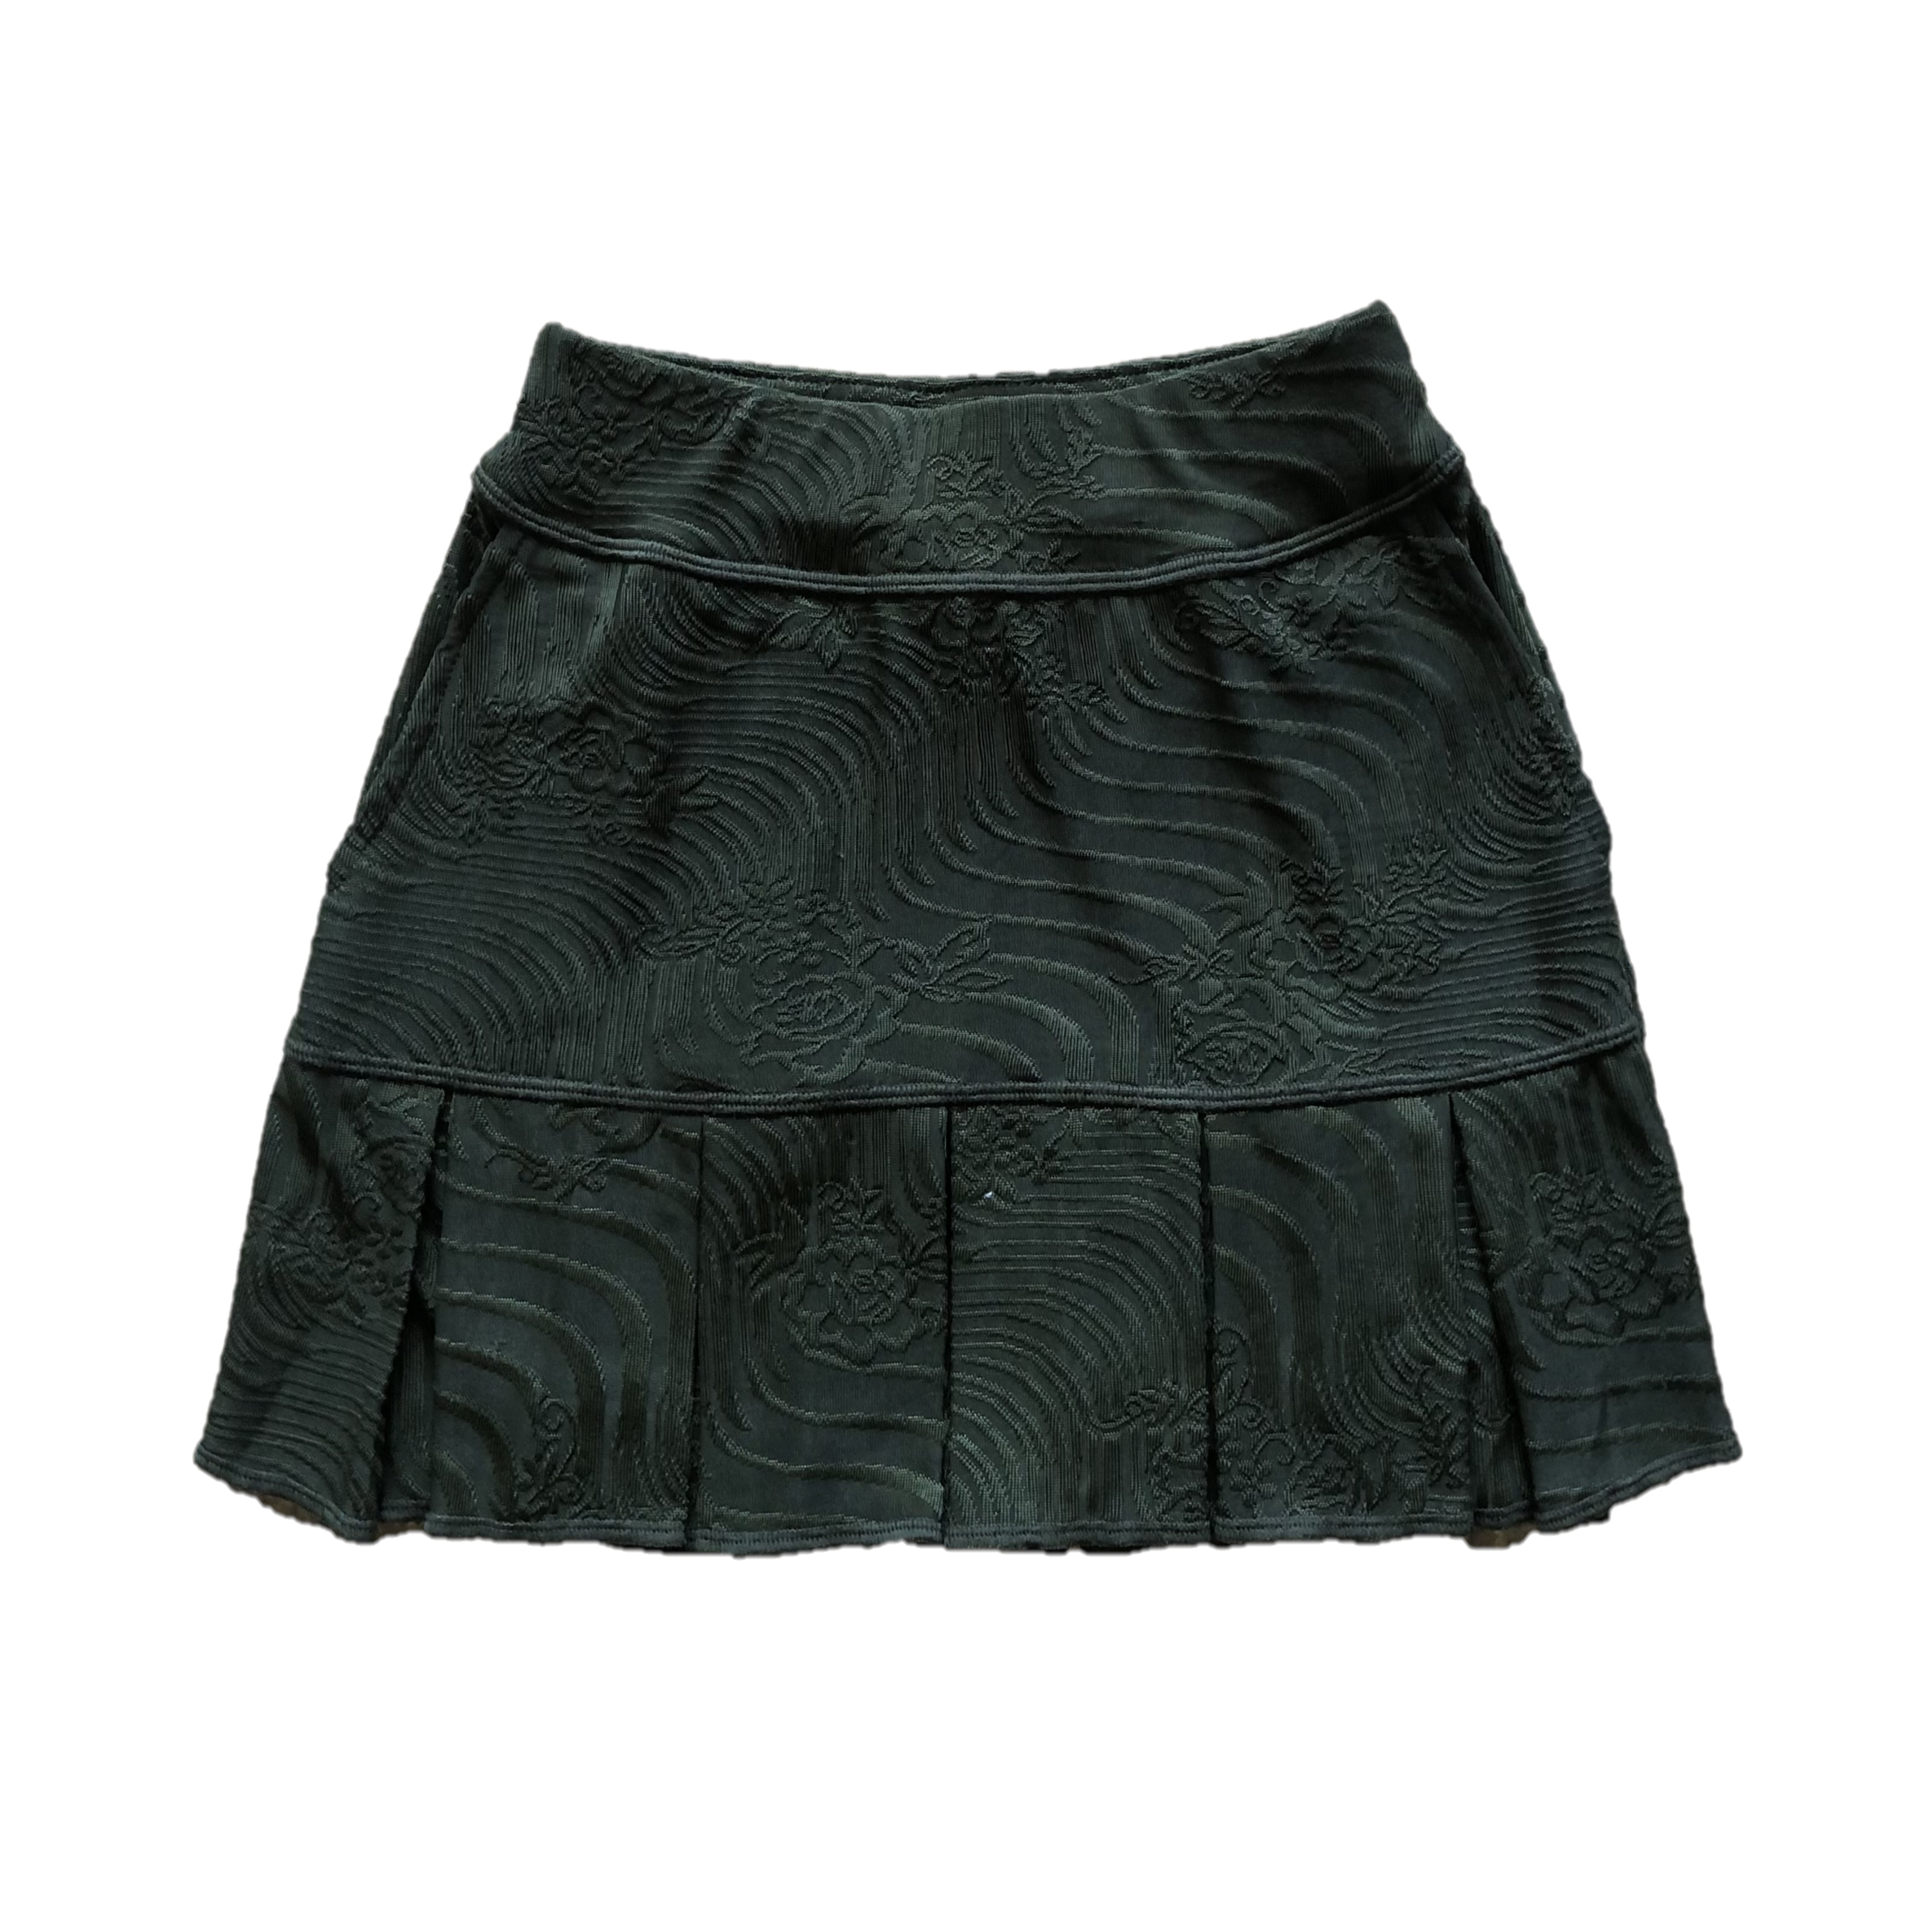 LS-064B || Skirt Soft  Bottle Green  Embossed with All Around Short Pleats